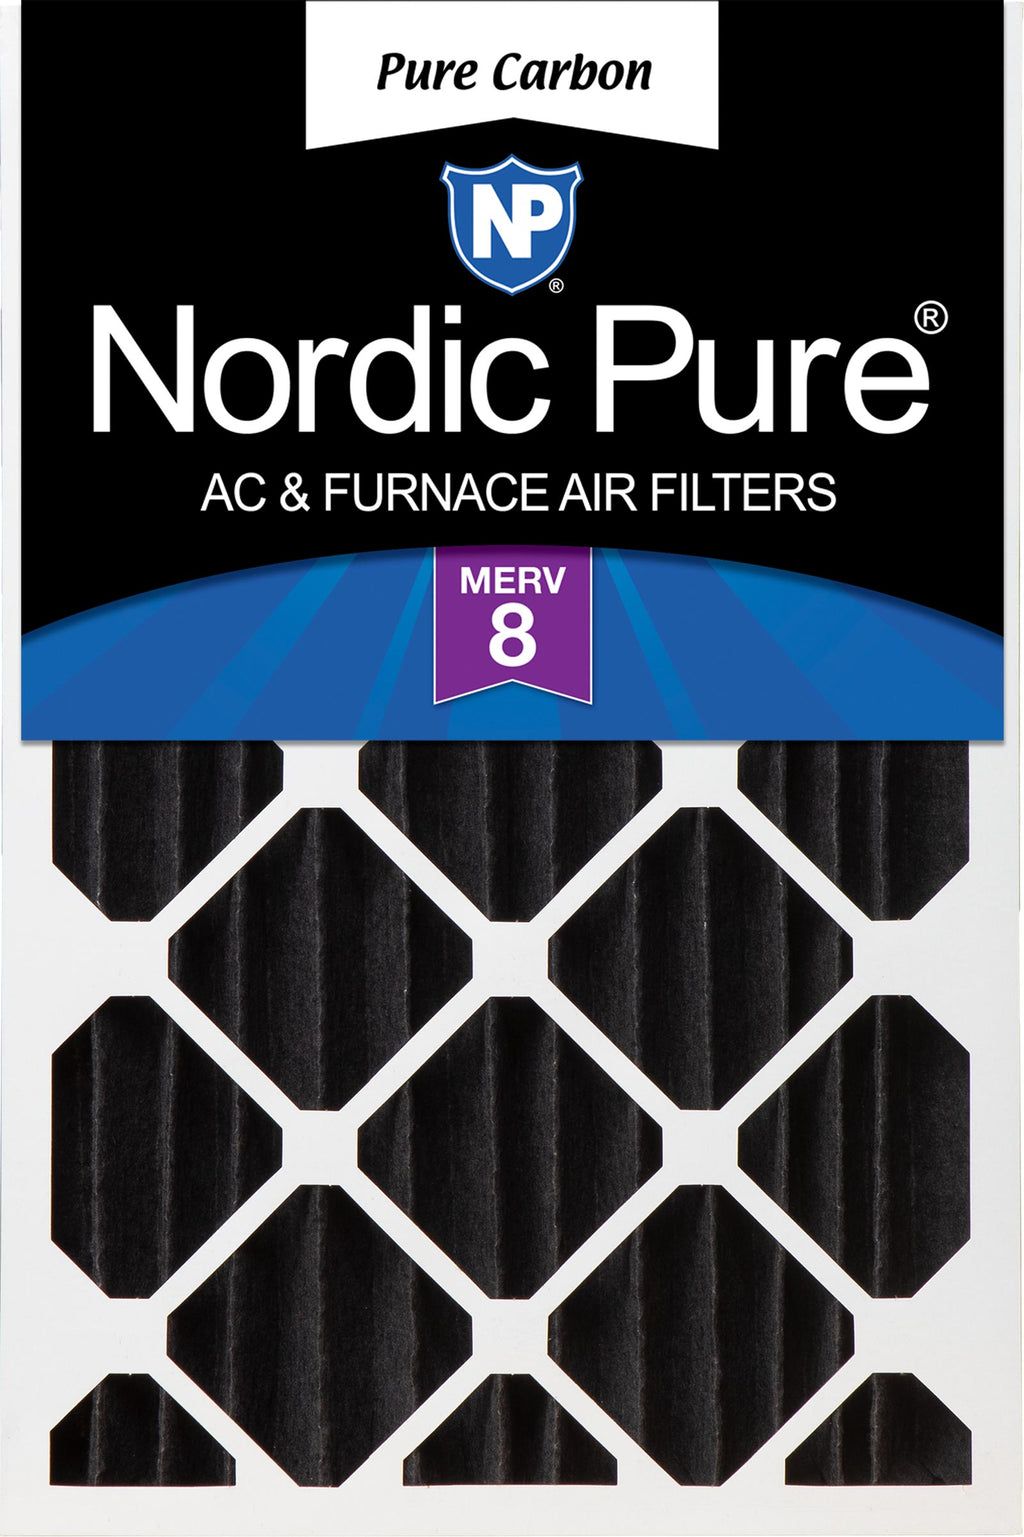 18x24x4 (3 5/8) Pure Carbon Pleated Odor Reduction Merv 8 Furnace Filter